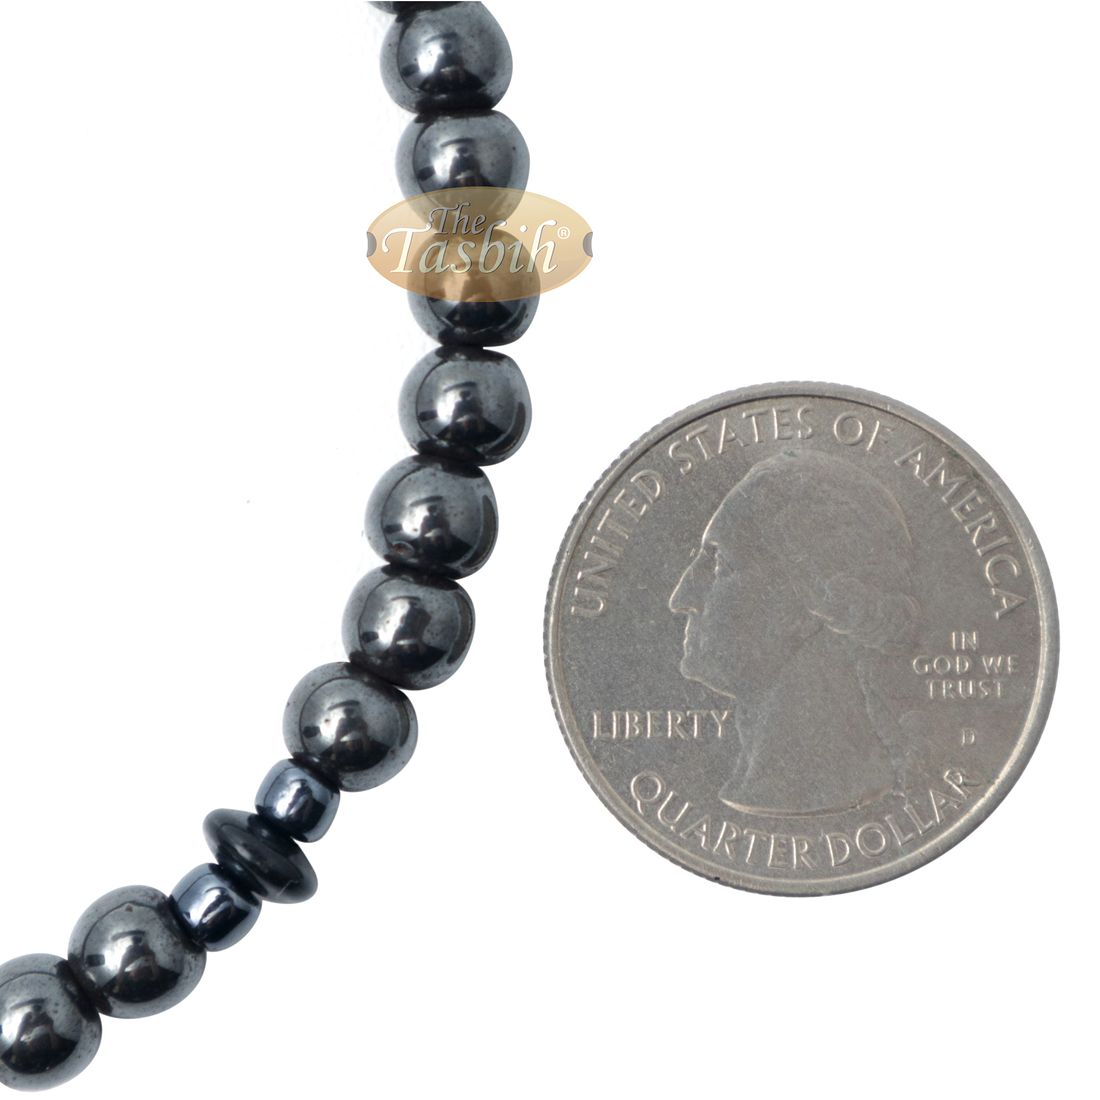 99-Bead Prayer Tasbih – Small 6mm Hematite Beads with Saucer Dividers and 3mm Accent – Islamic Stone Rosary Sibha Dhikr Tasbeeh with Gift Box